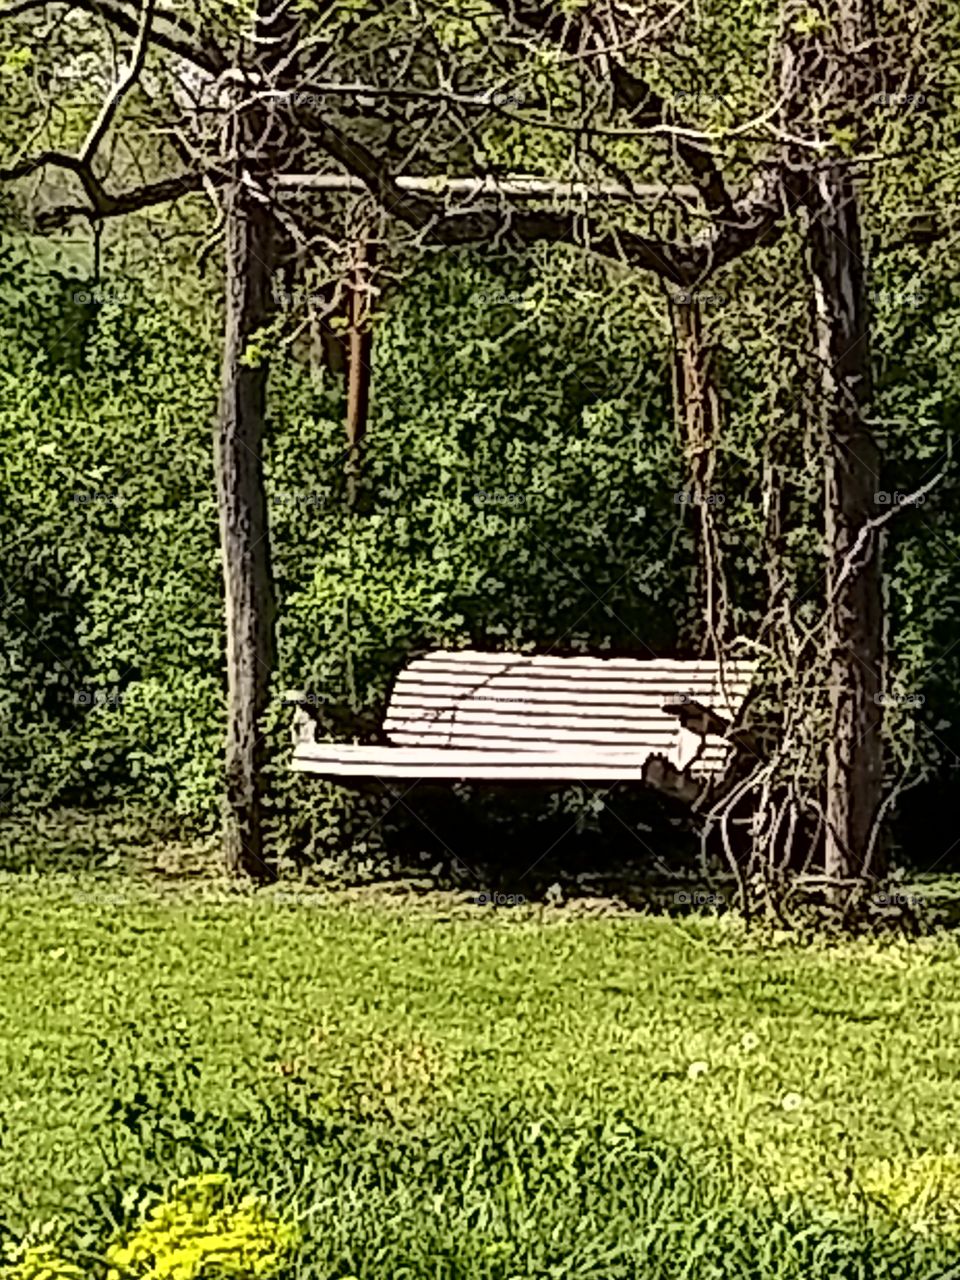 An inviting rustic swing in someone's back yard, at Arrow Rock, Missouri.